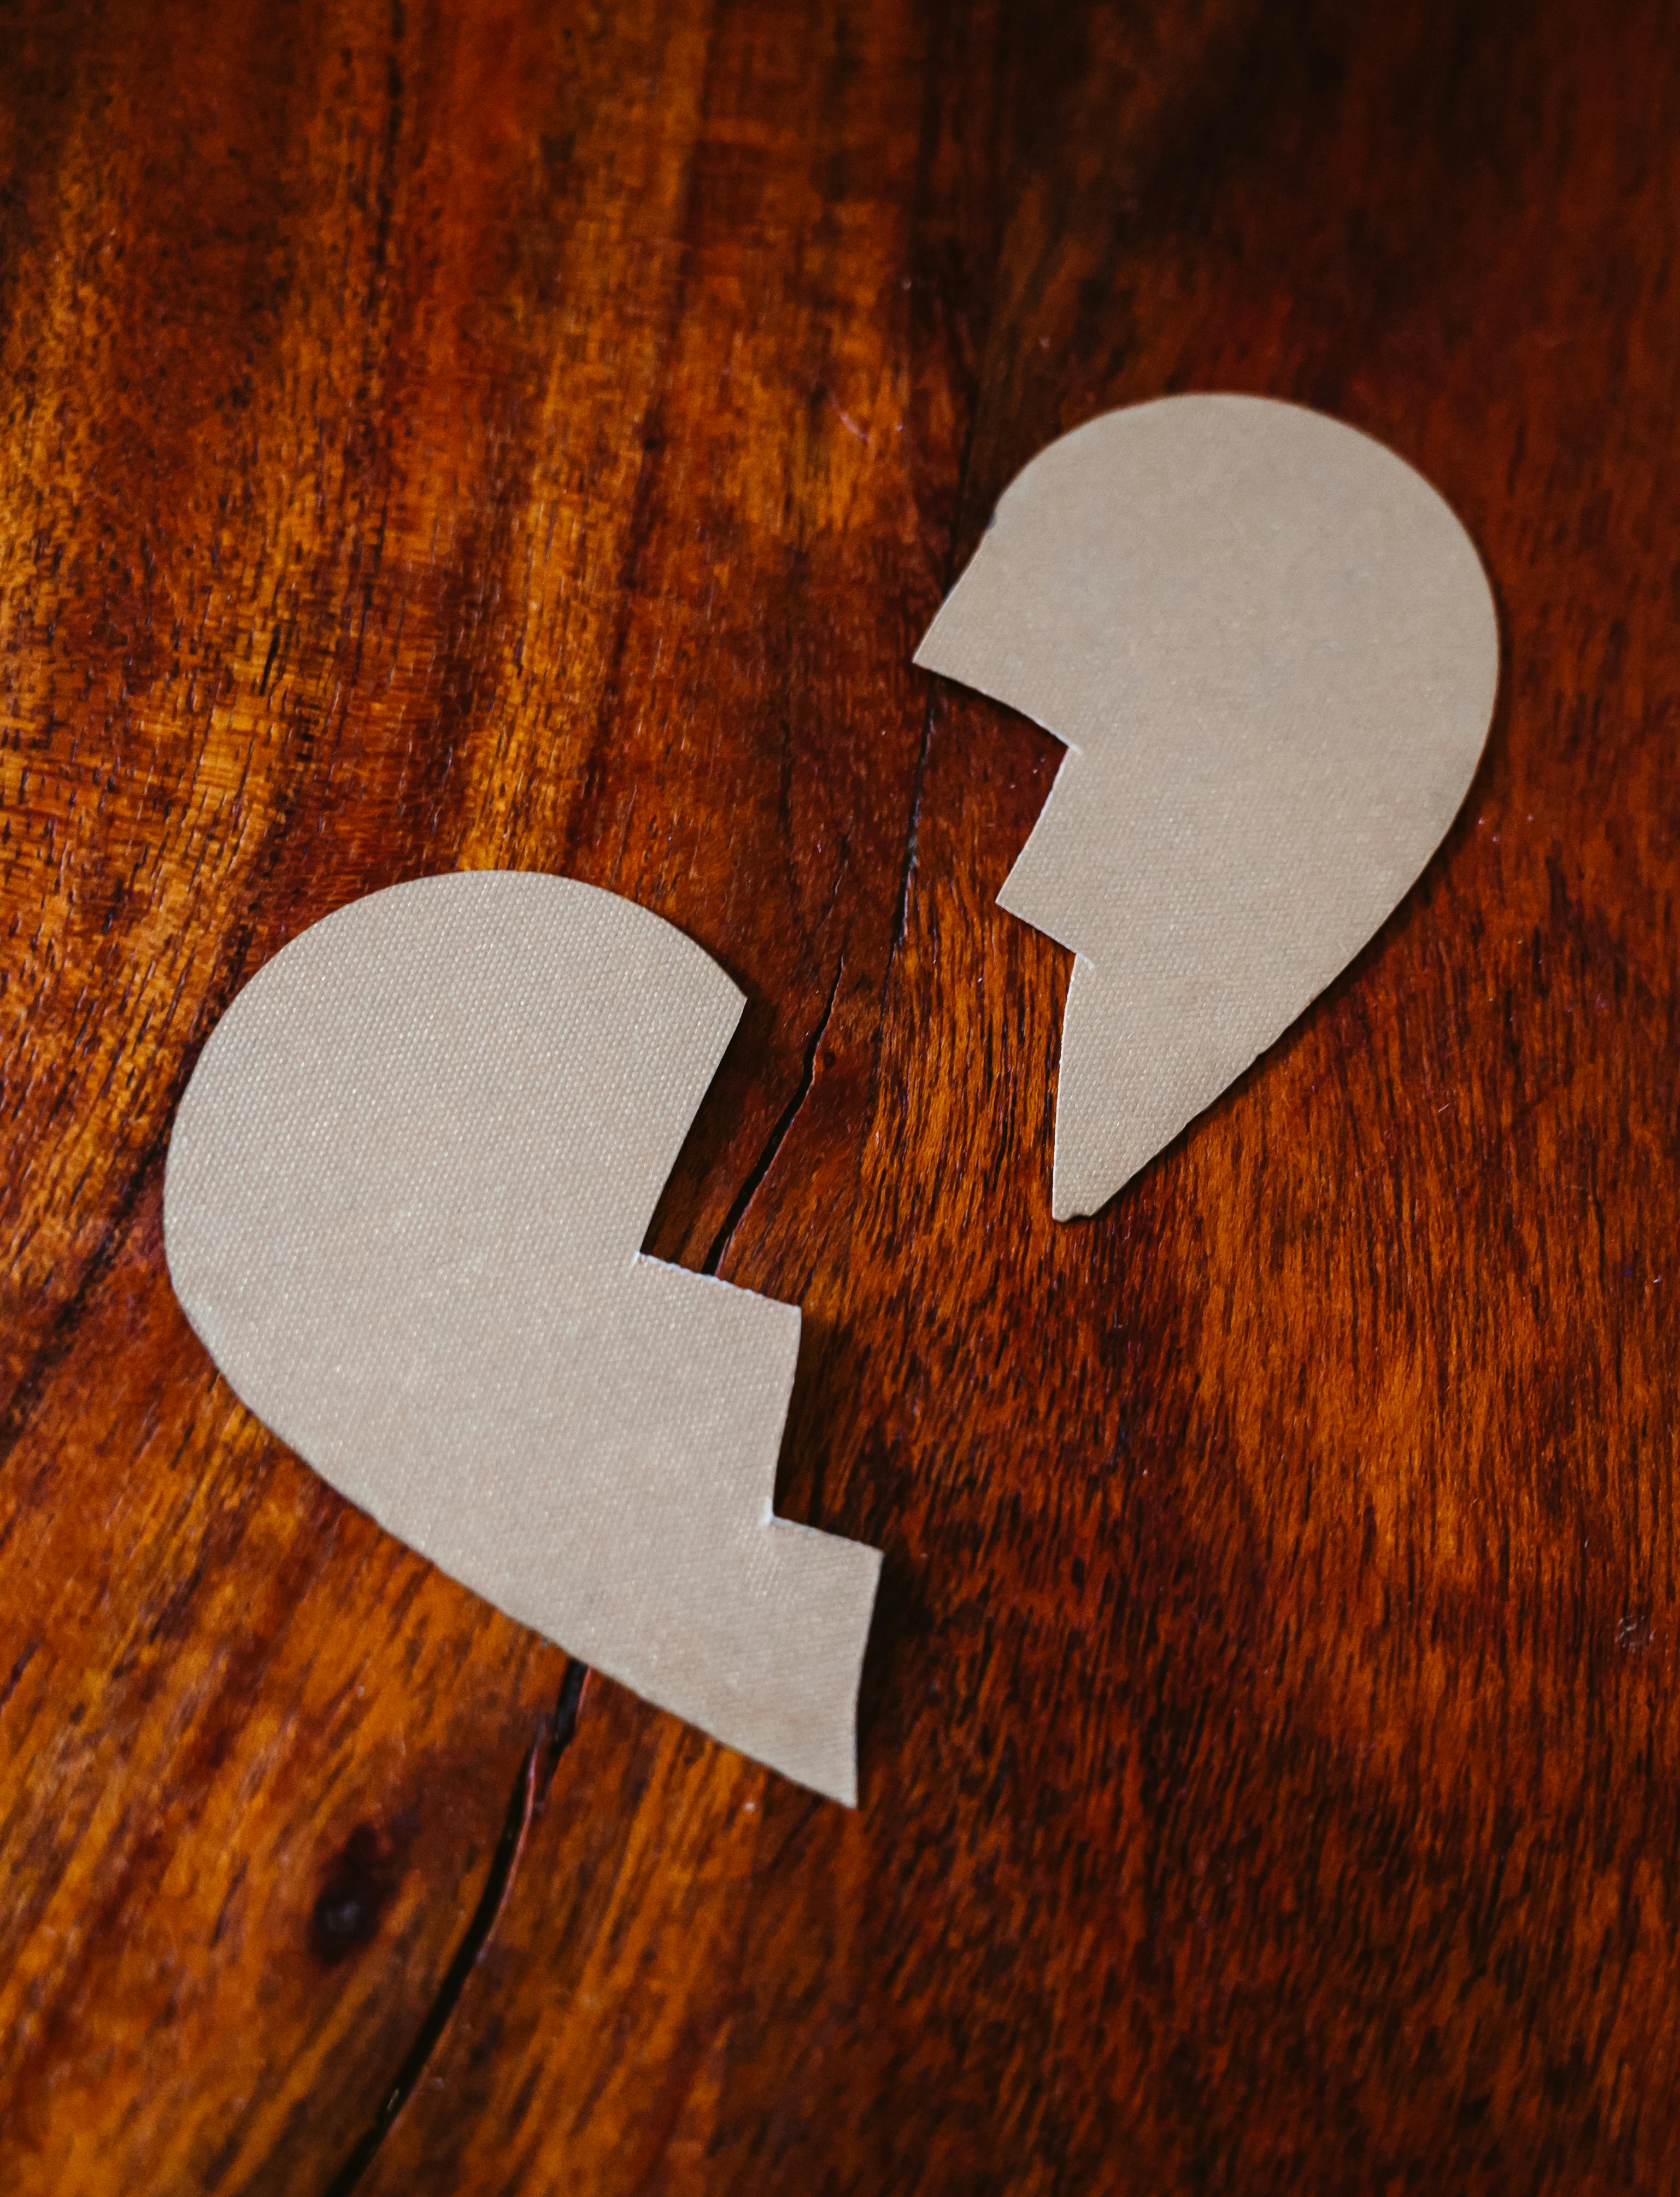 A white paper heart cut in two | Source: Pexels